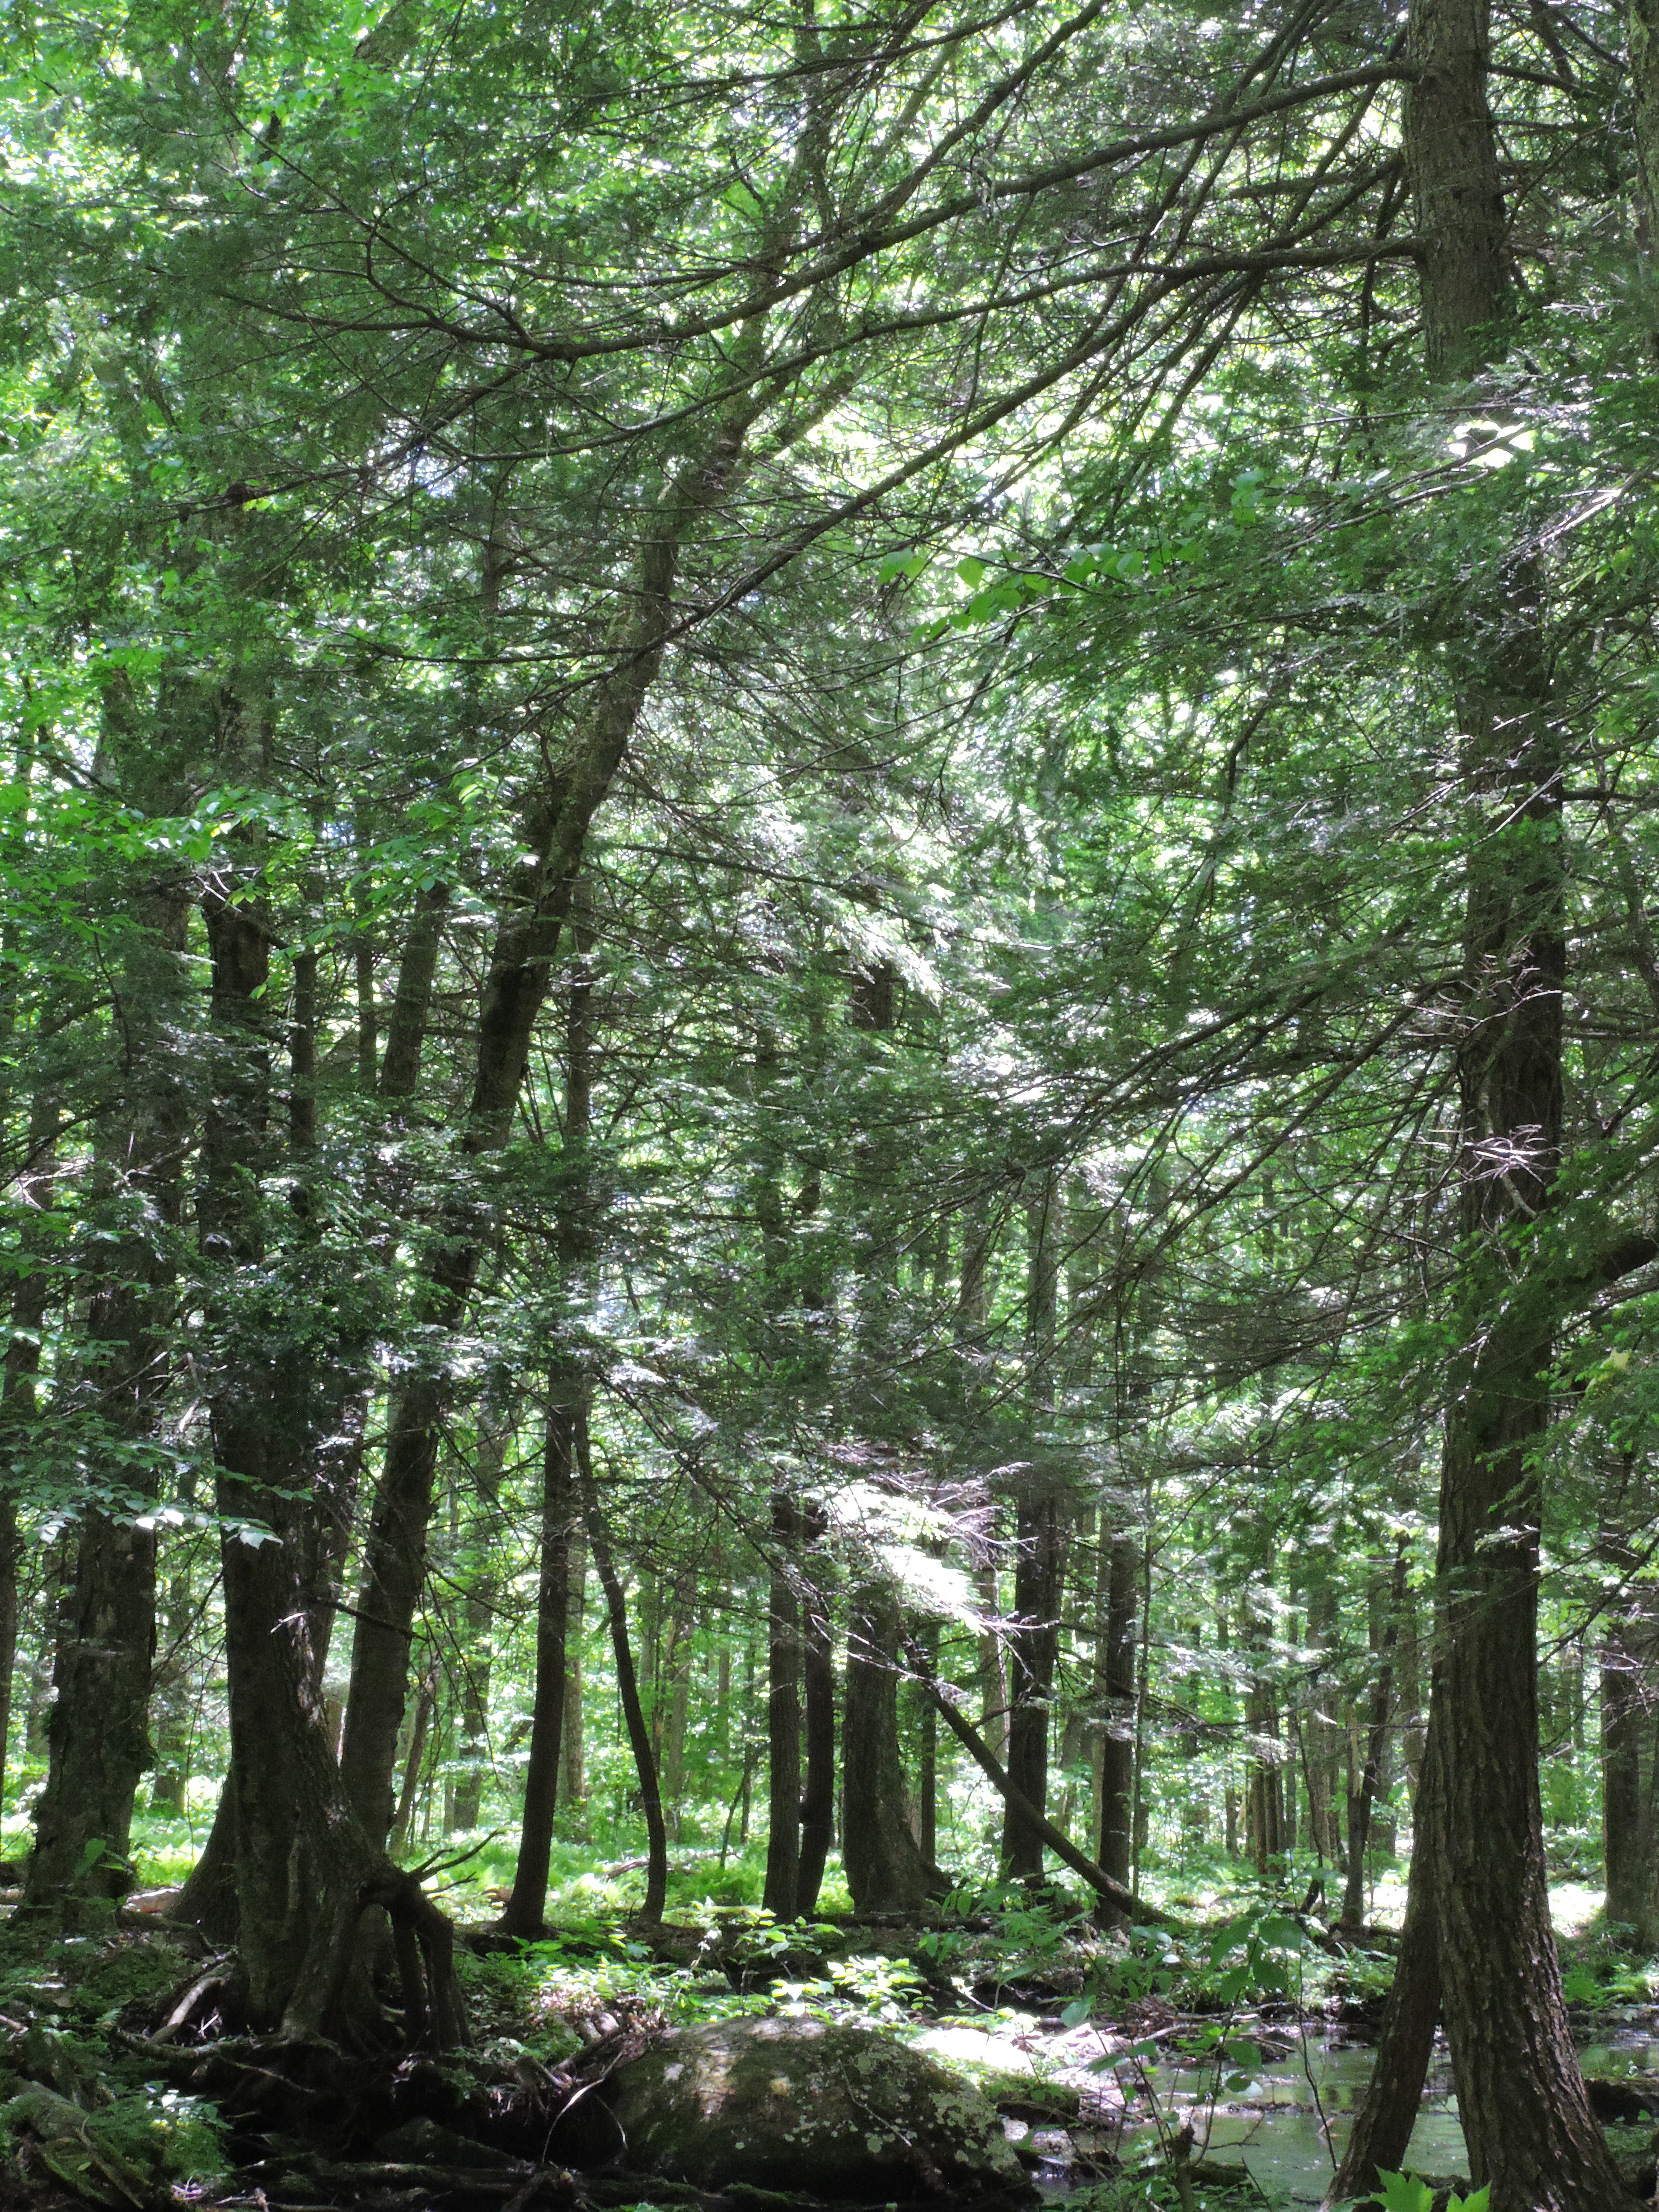 Main page image for Hemlock Forest Inventory Dataset